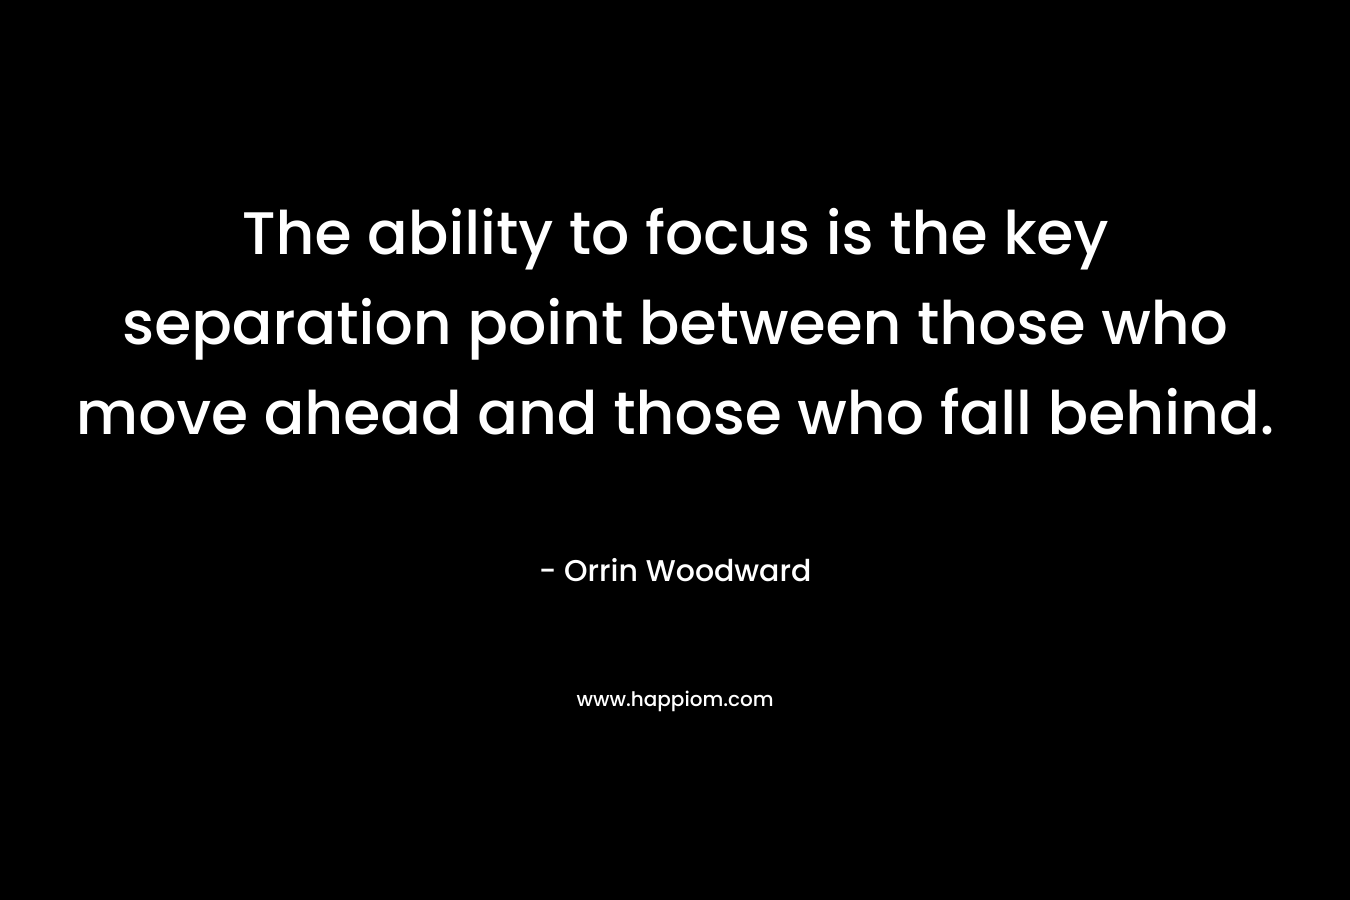 The ability to focus is the key separation point between those who move ahead and those who fall behind.